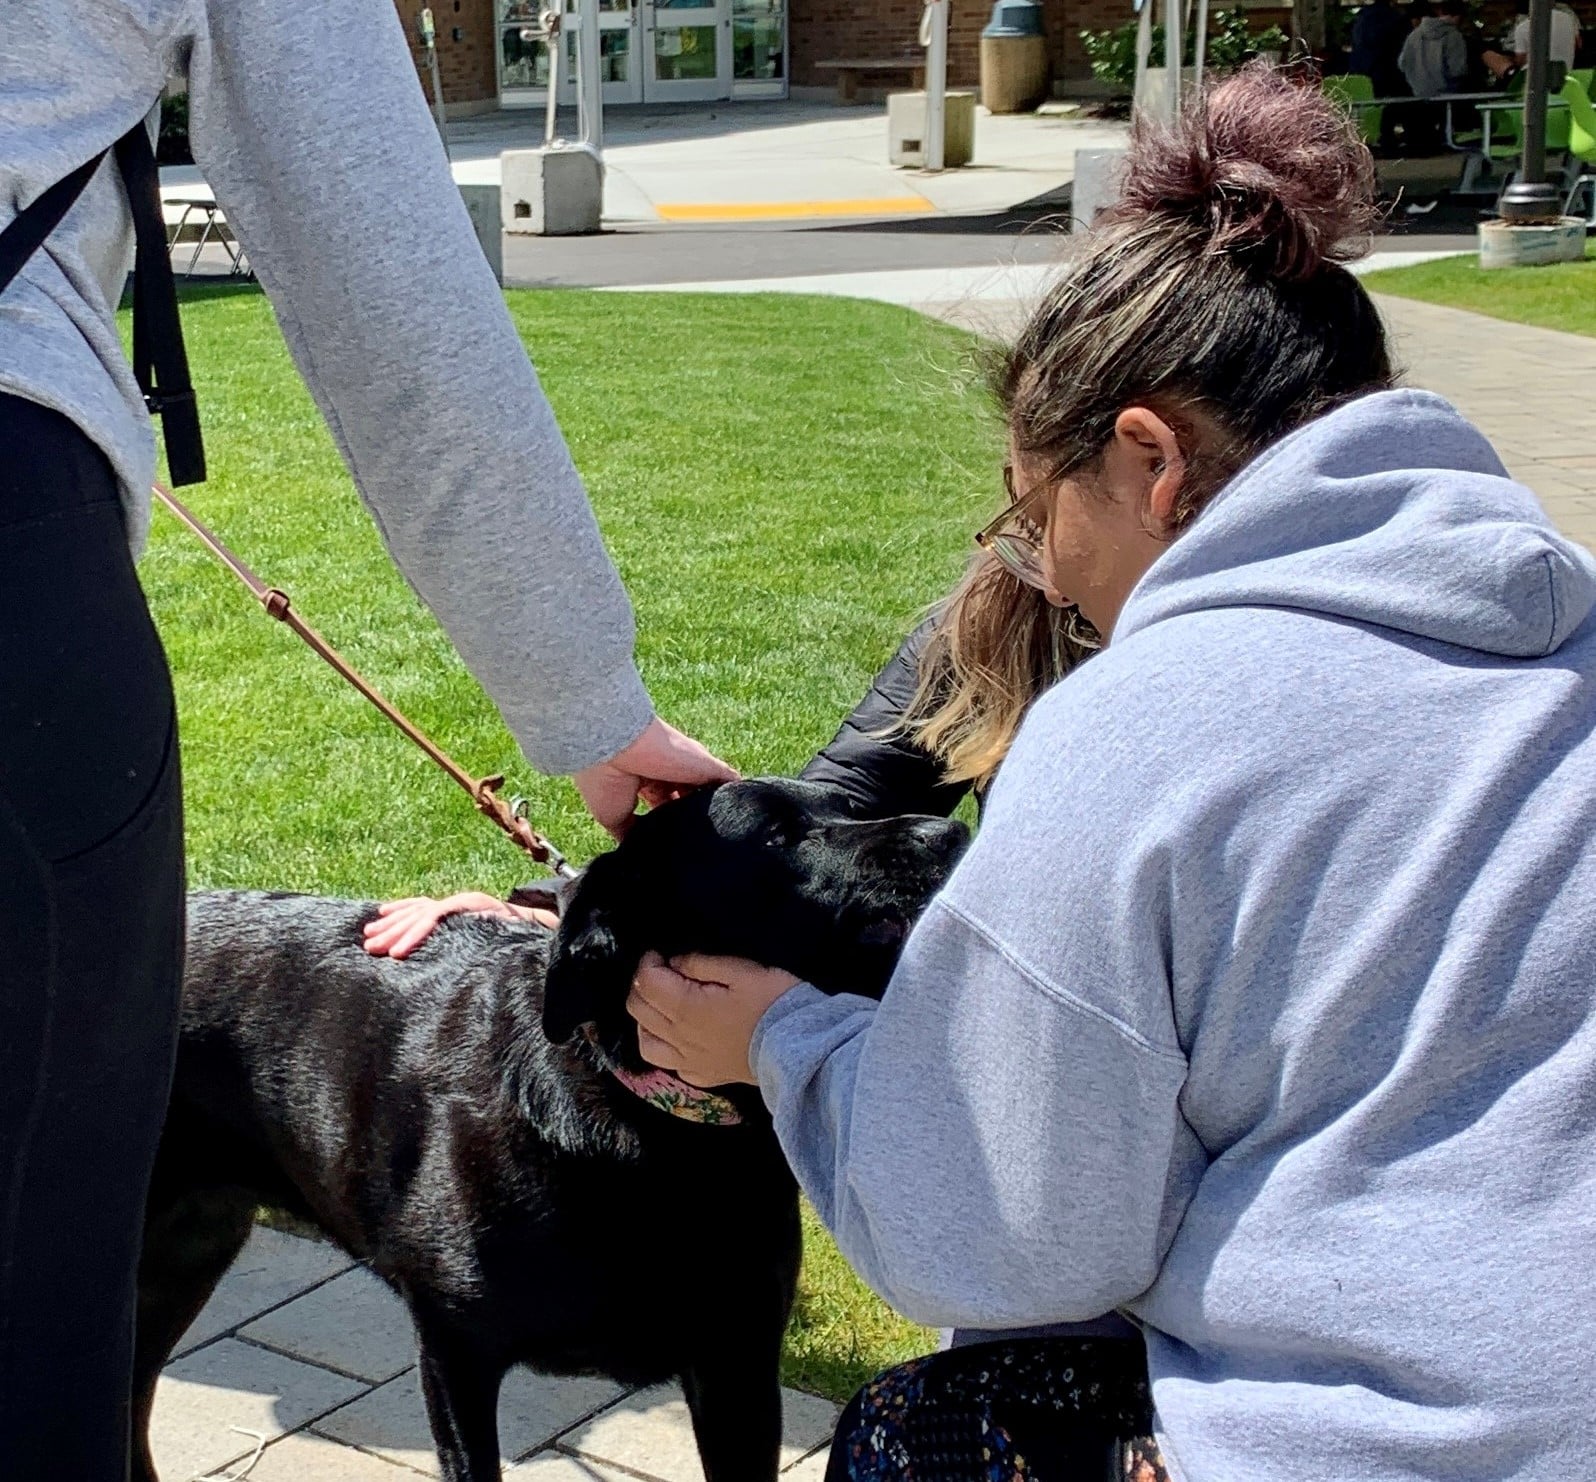 Black lab received pets and attention during a visit.